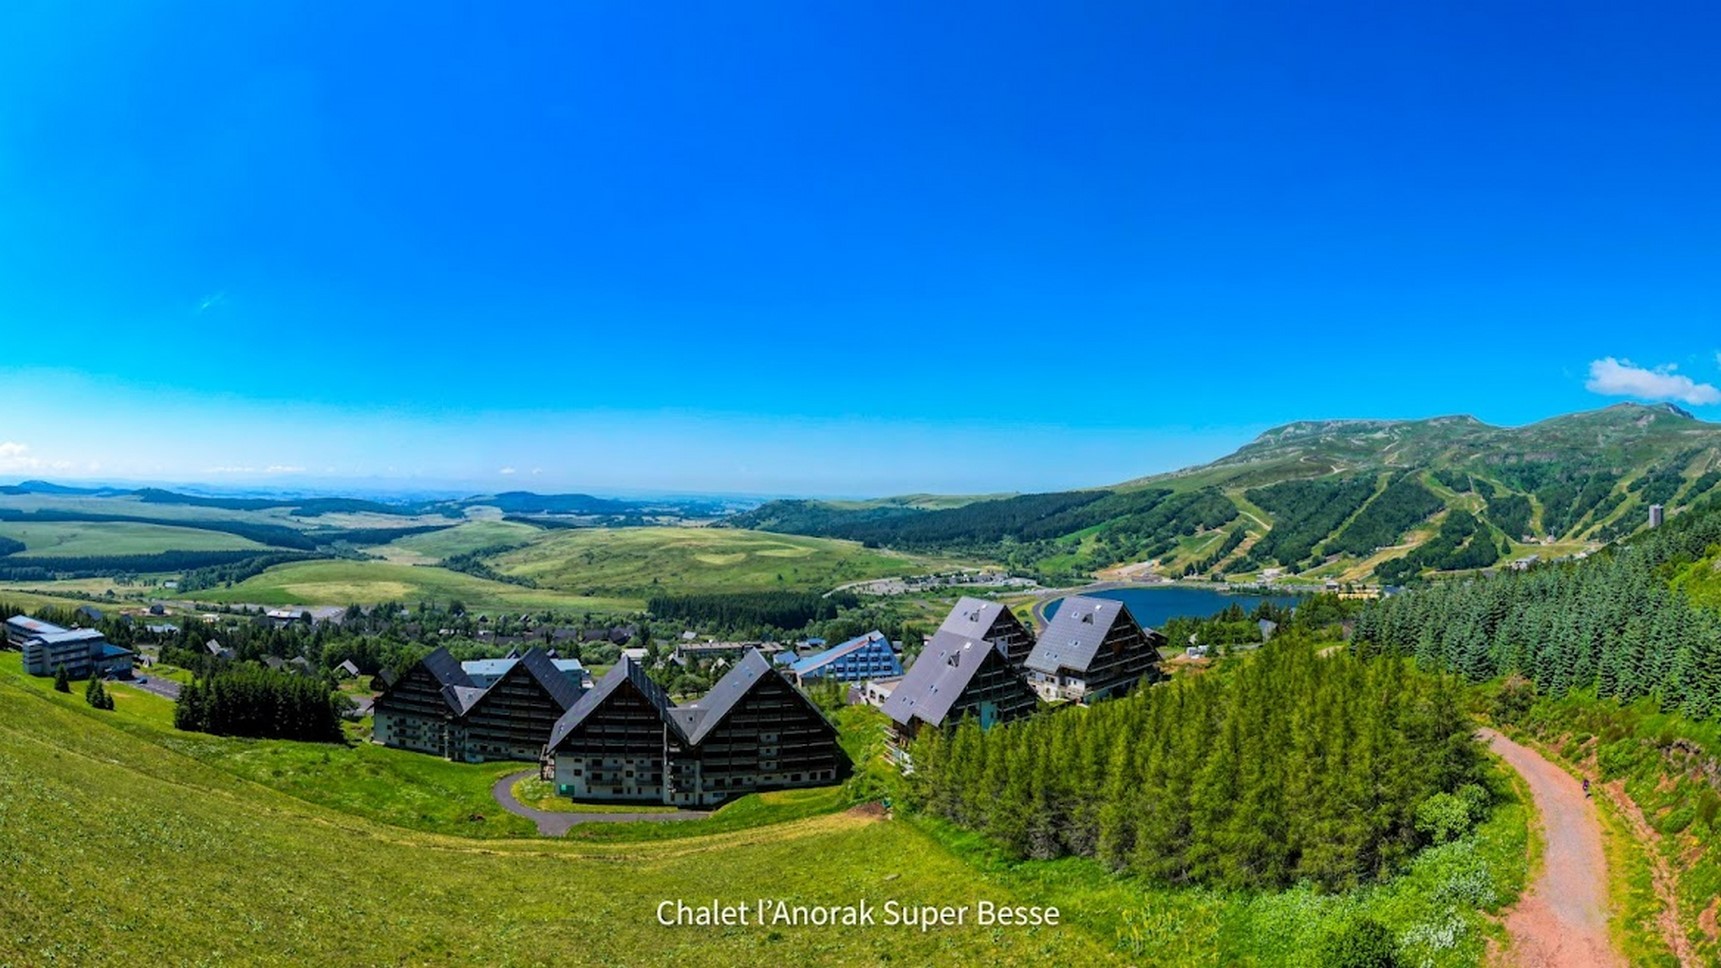 The Chalet l'Anorak in Super Besse, panorama of the summer resort of Super Besse